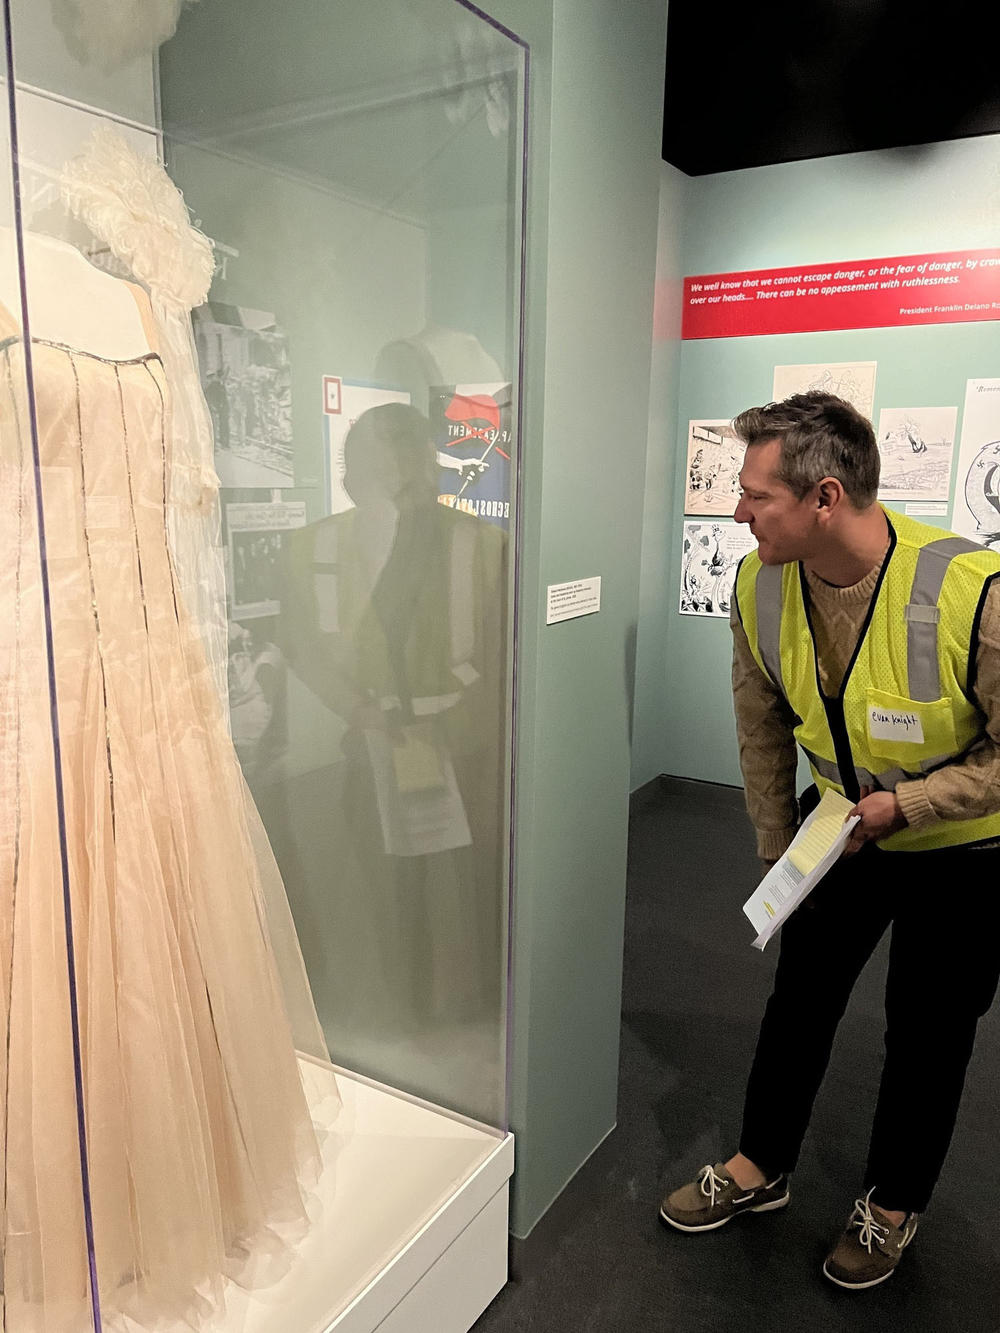 Disaster response training participant Evan Knight peers into a display case containing a ballgown worn by Rosemary Kennedy in 1938.